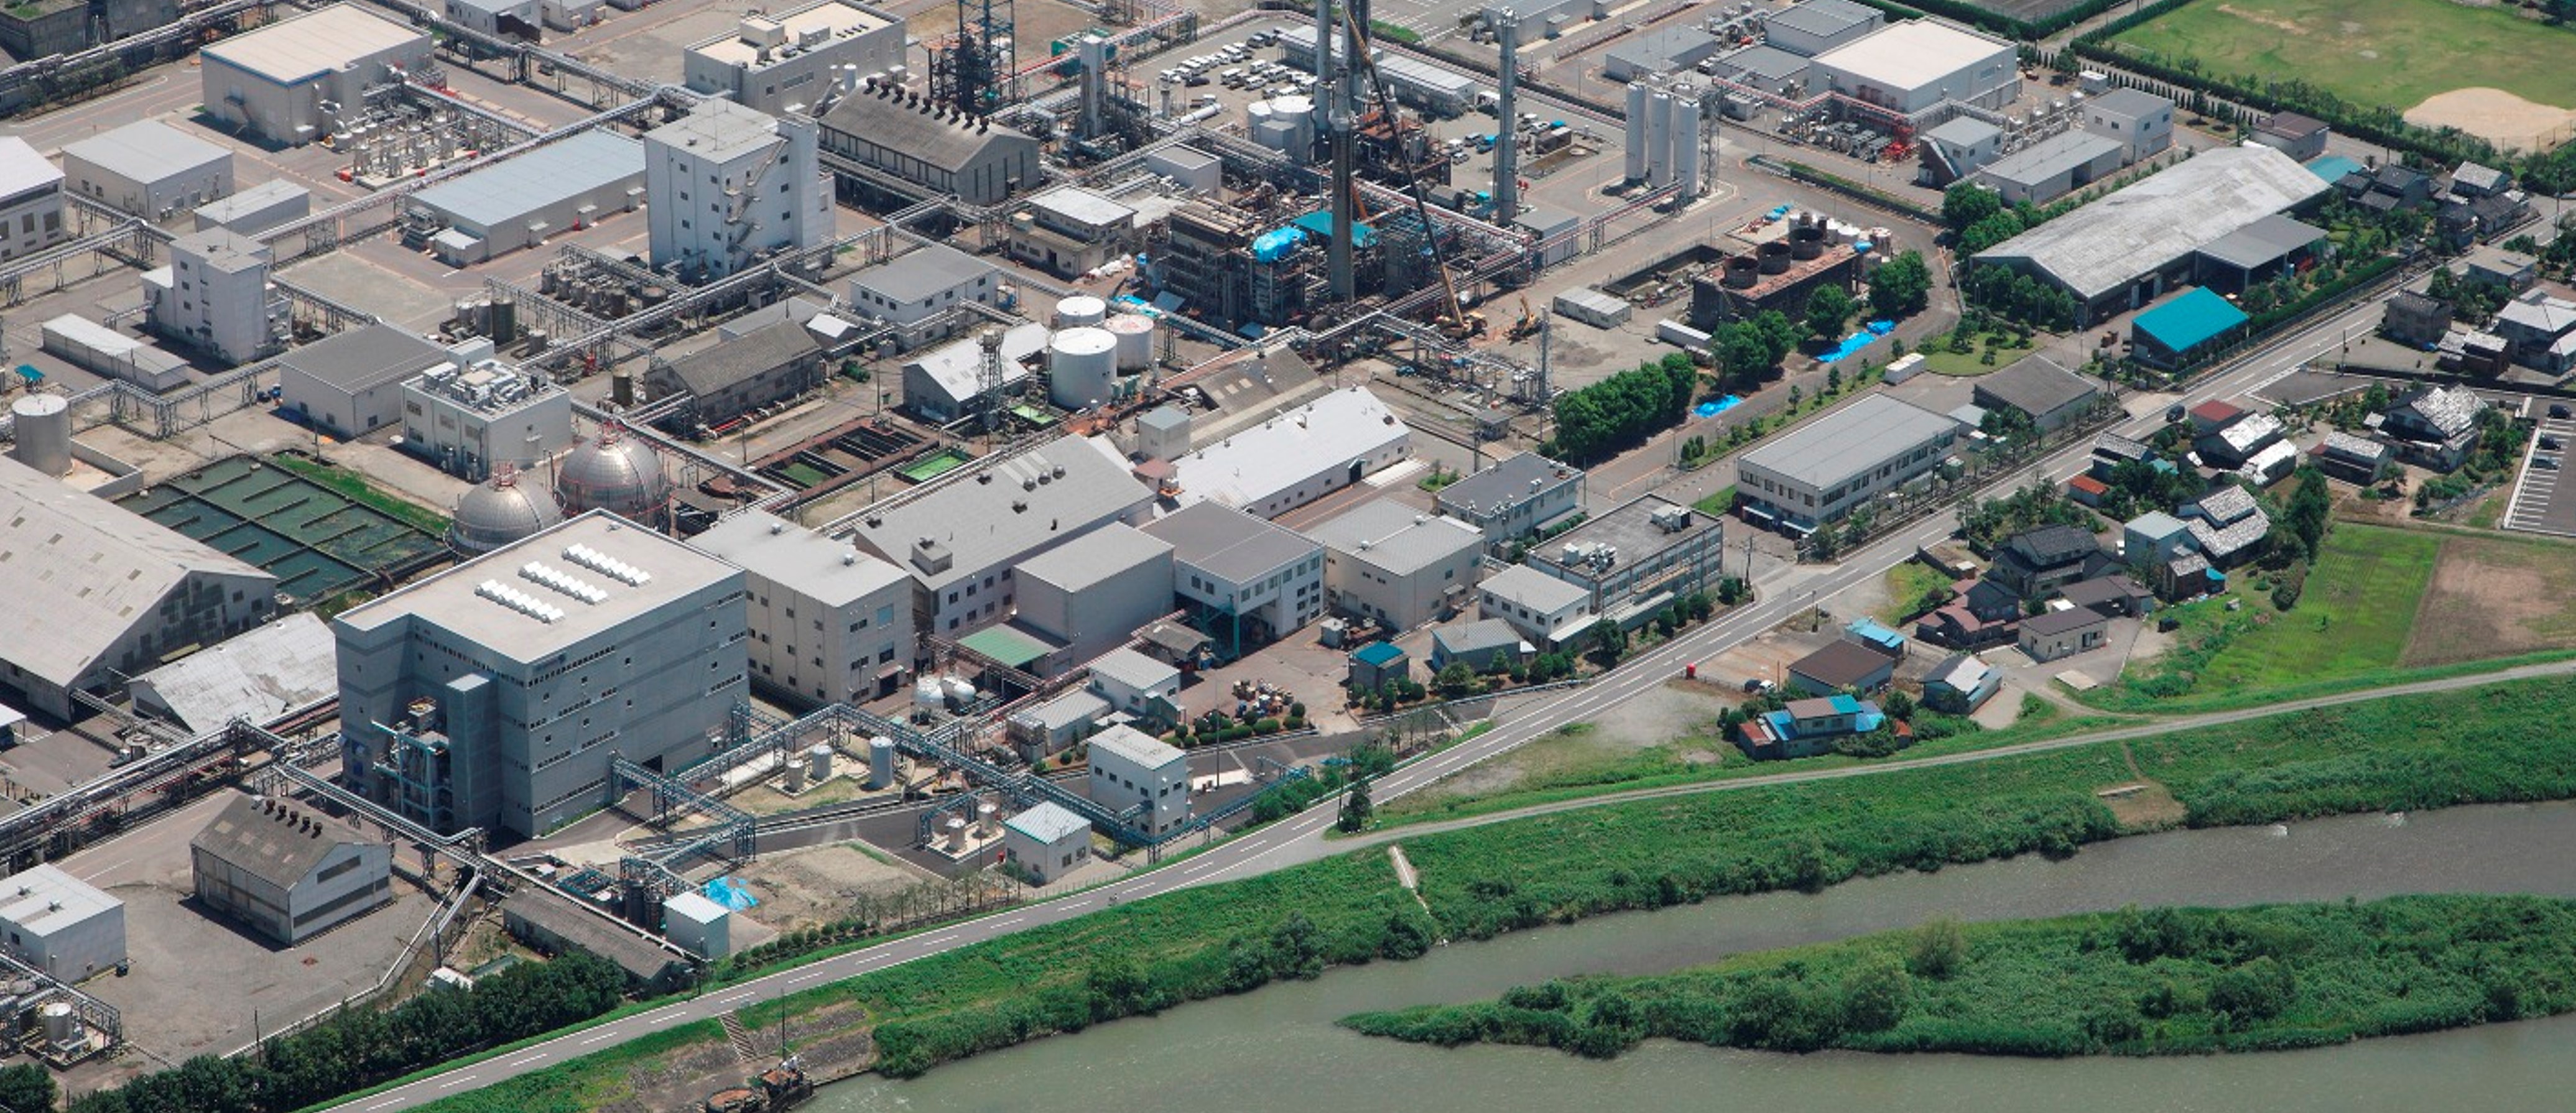 Clariant's catalyst research and production site in Toyama, Japan.